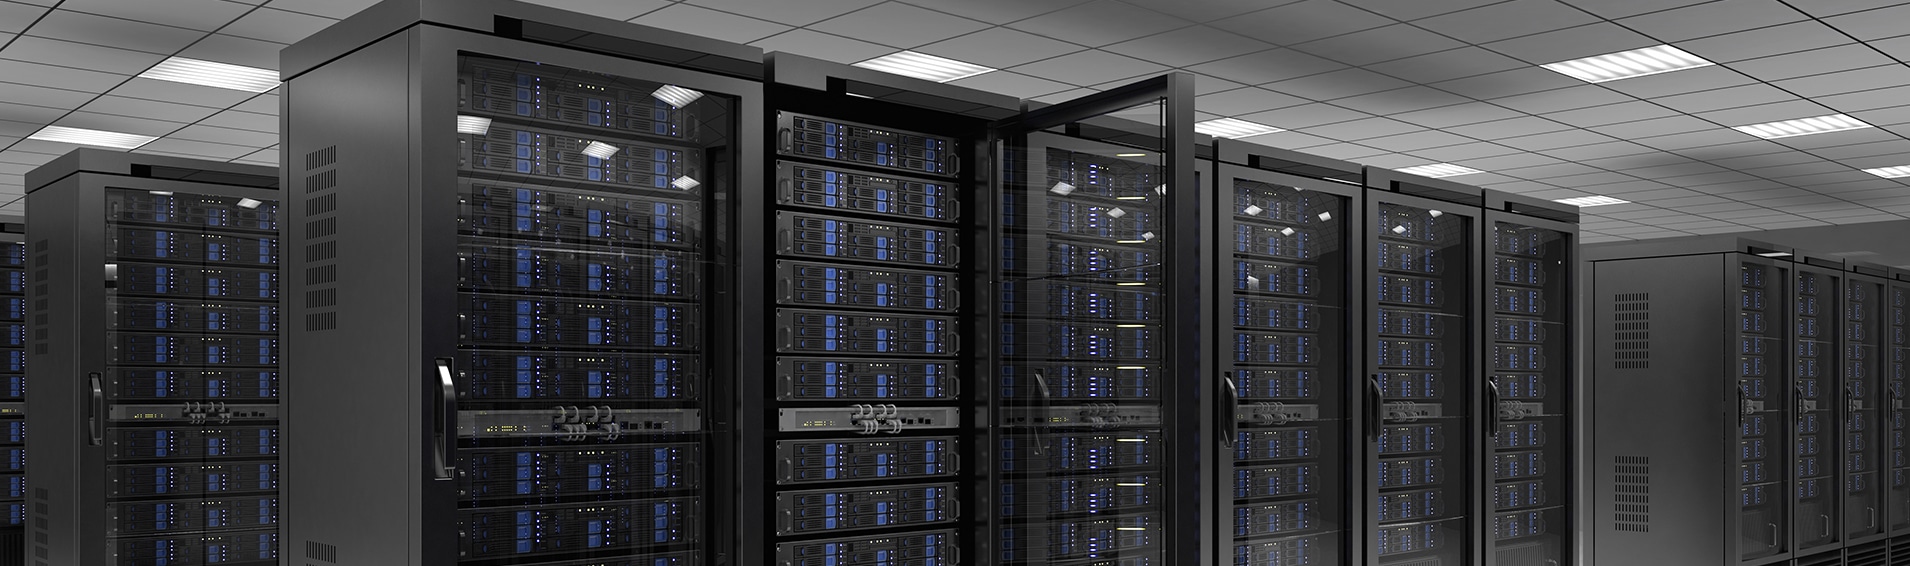 Rapid Transformation in the Data Center Space